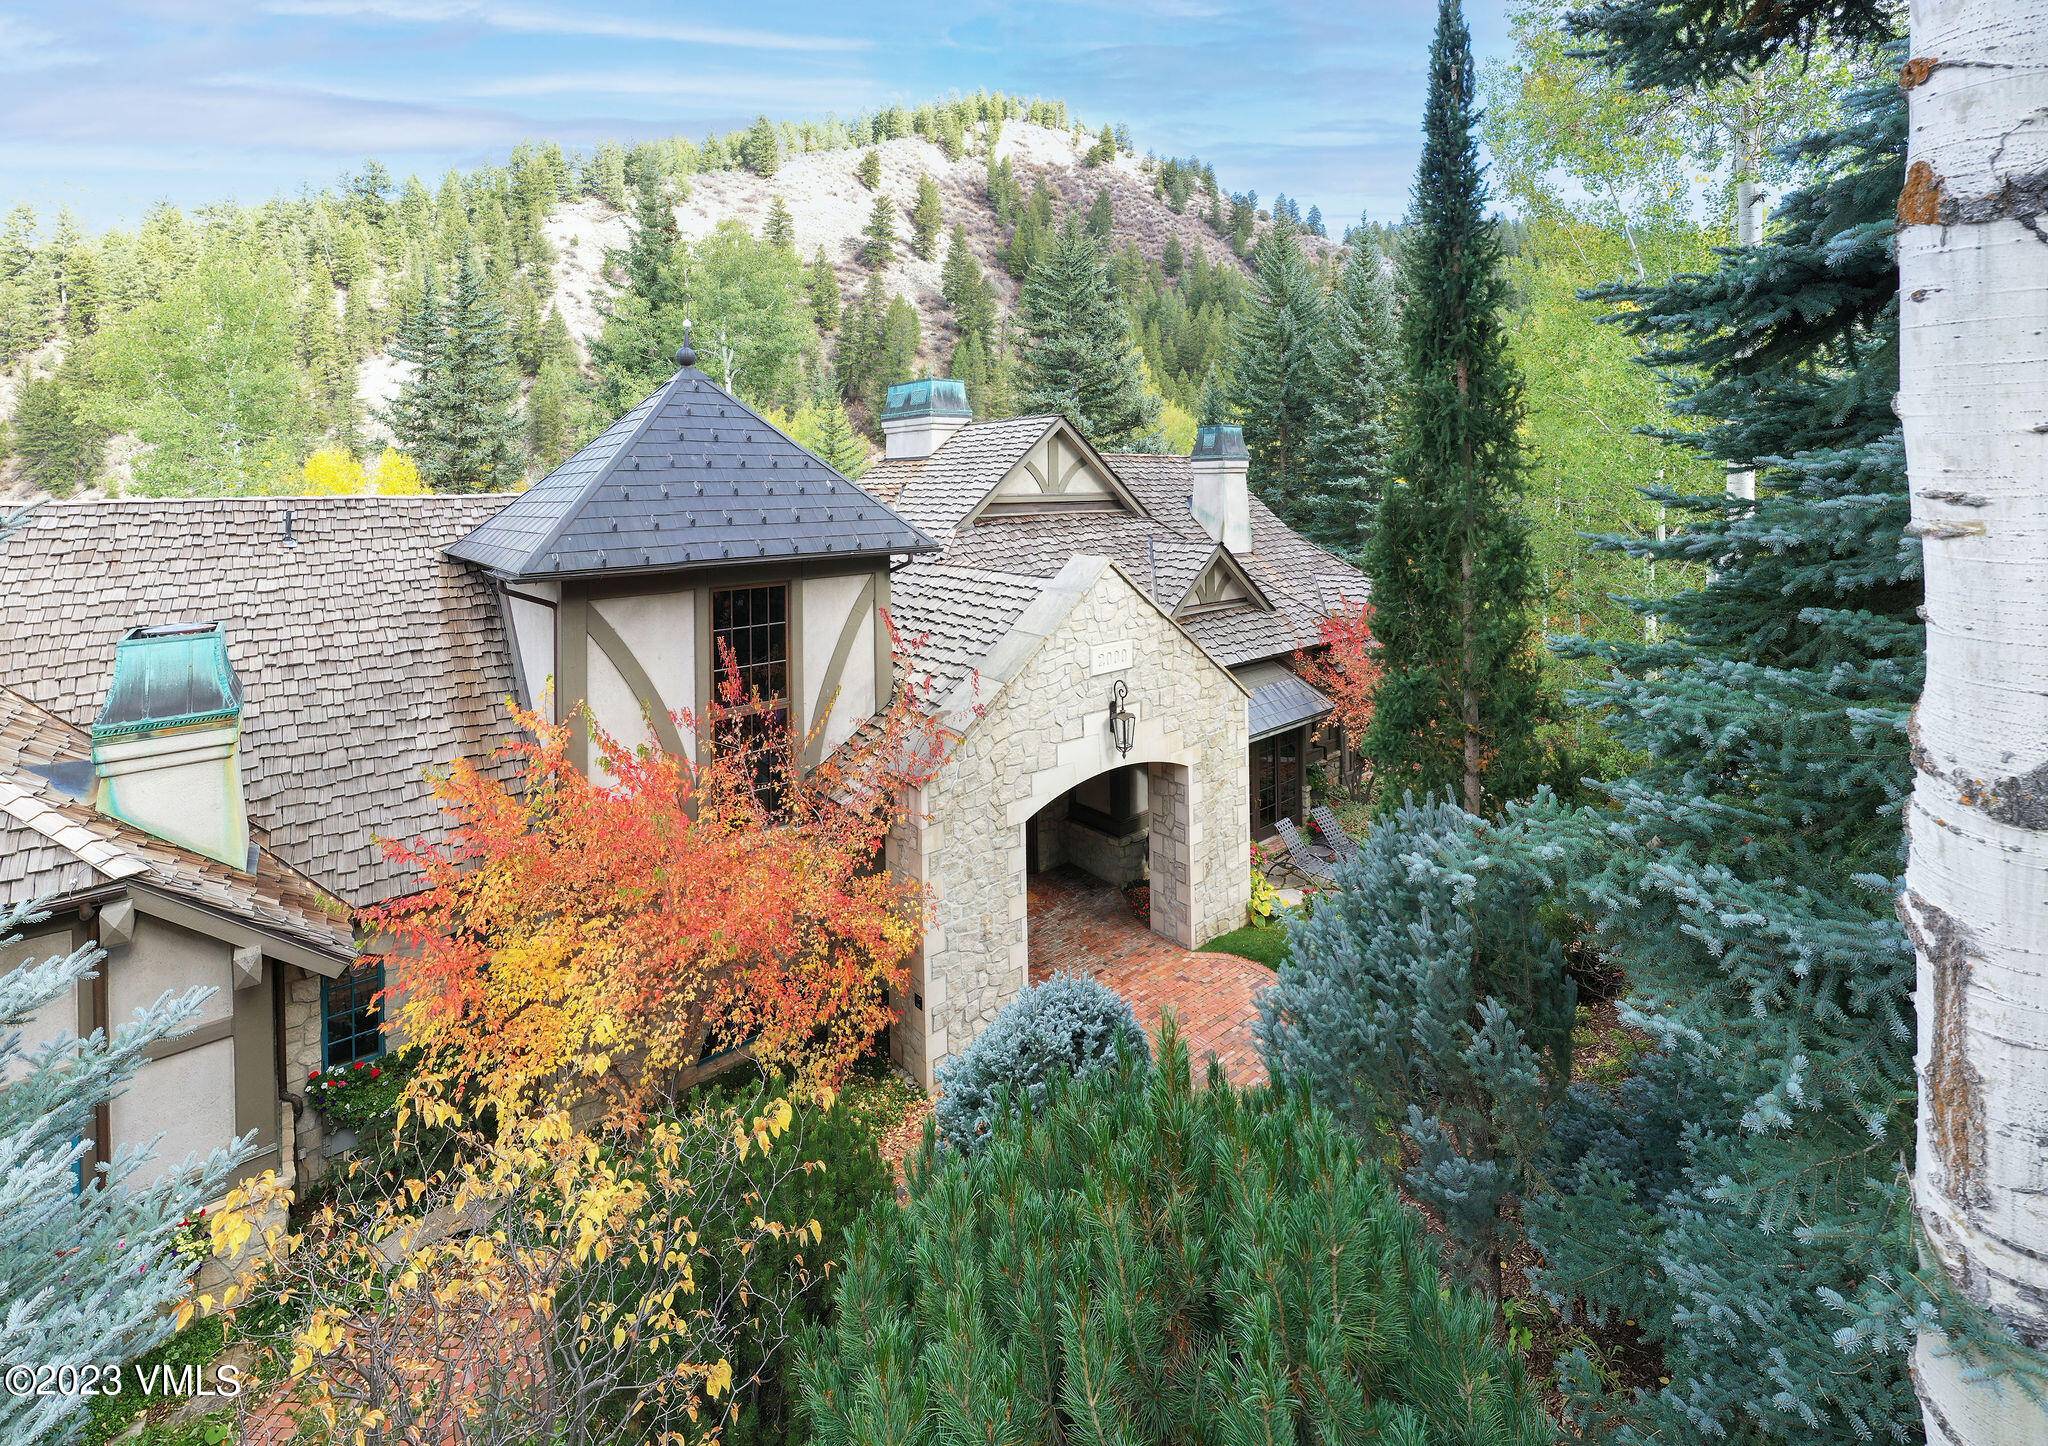 Come experience a truly remarkable home in Beaver Creek, artfully situated amidst one of the most private, unique homesites within the resort.